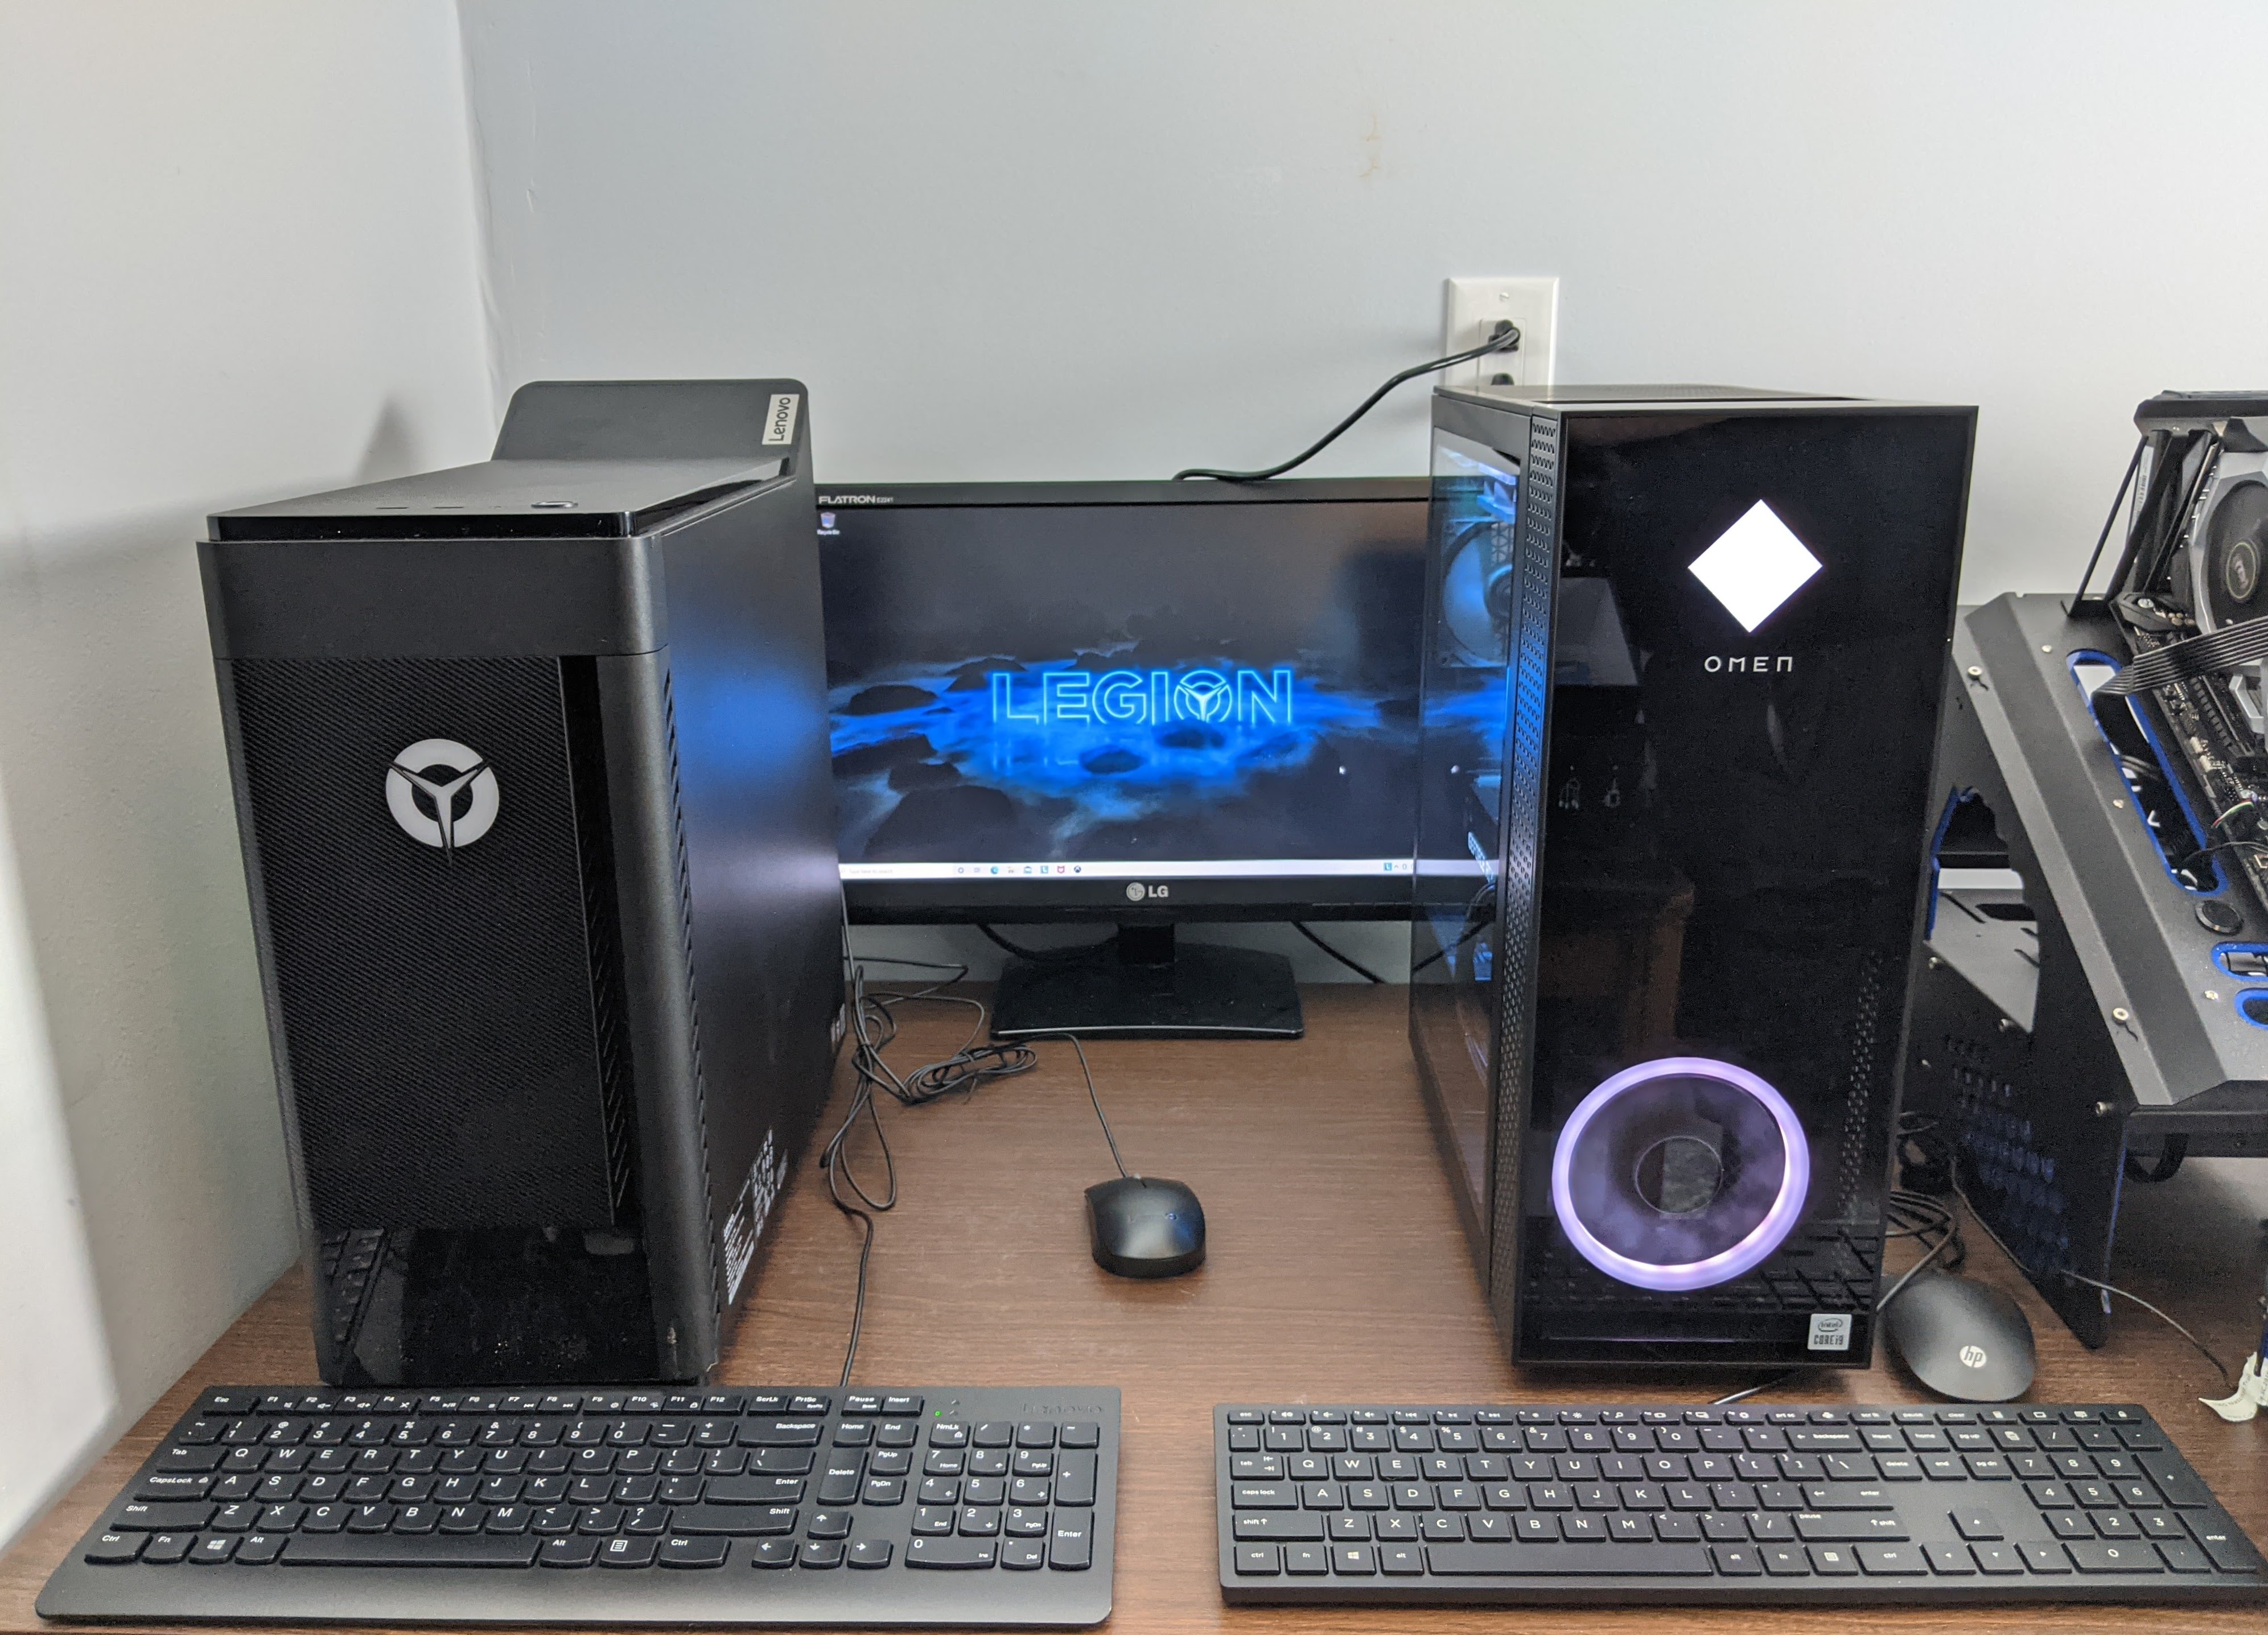 How To Buy A Gaming Pc In 21 Best Gaming Pcs Gpus And More Ars Technica